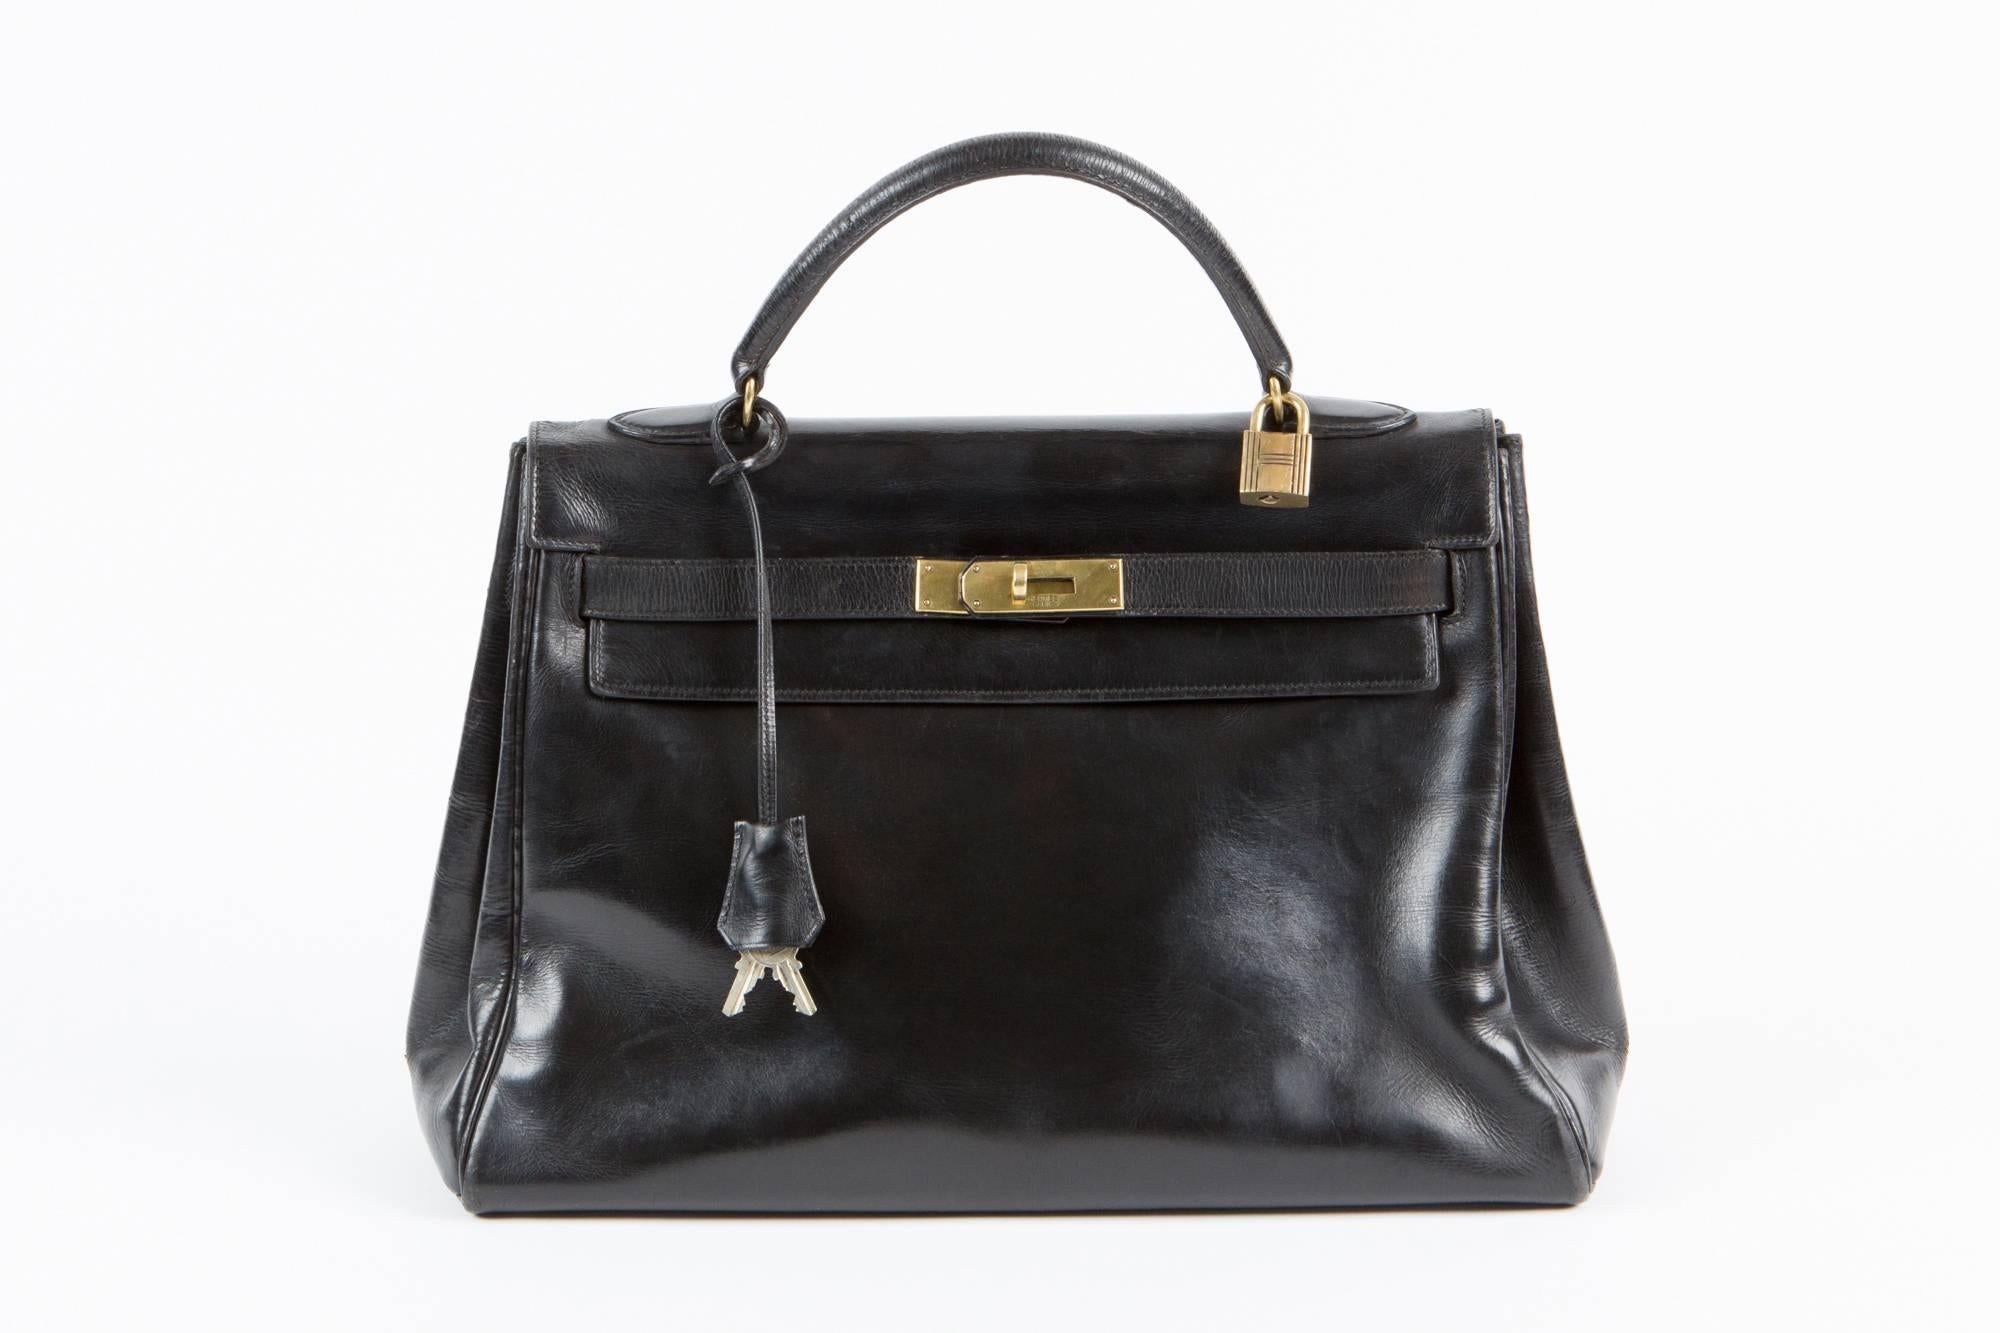 Fabulous 1965-70, Hermes Vintage black Kelly bag in 32cm, this classic bag features gold- plated hardware and comes with it's original clochette, lock, 2 keys, and shoulder strap. 
Exceptional, rare and collectable Kelly of the 60s. 
Marked